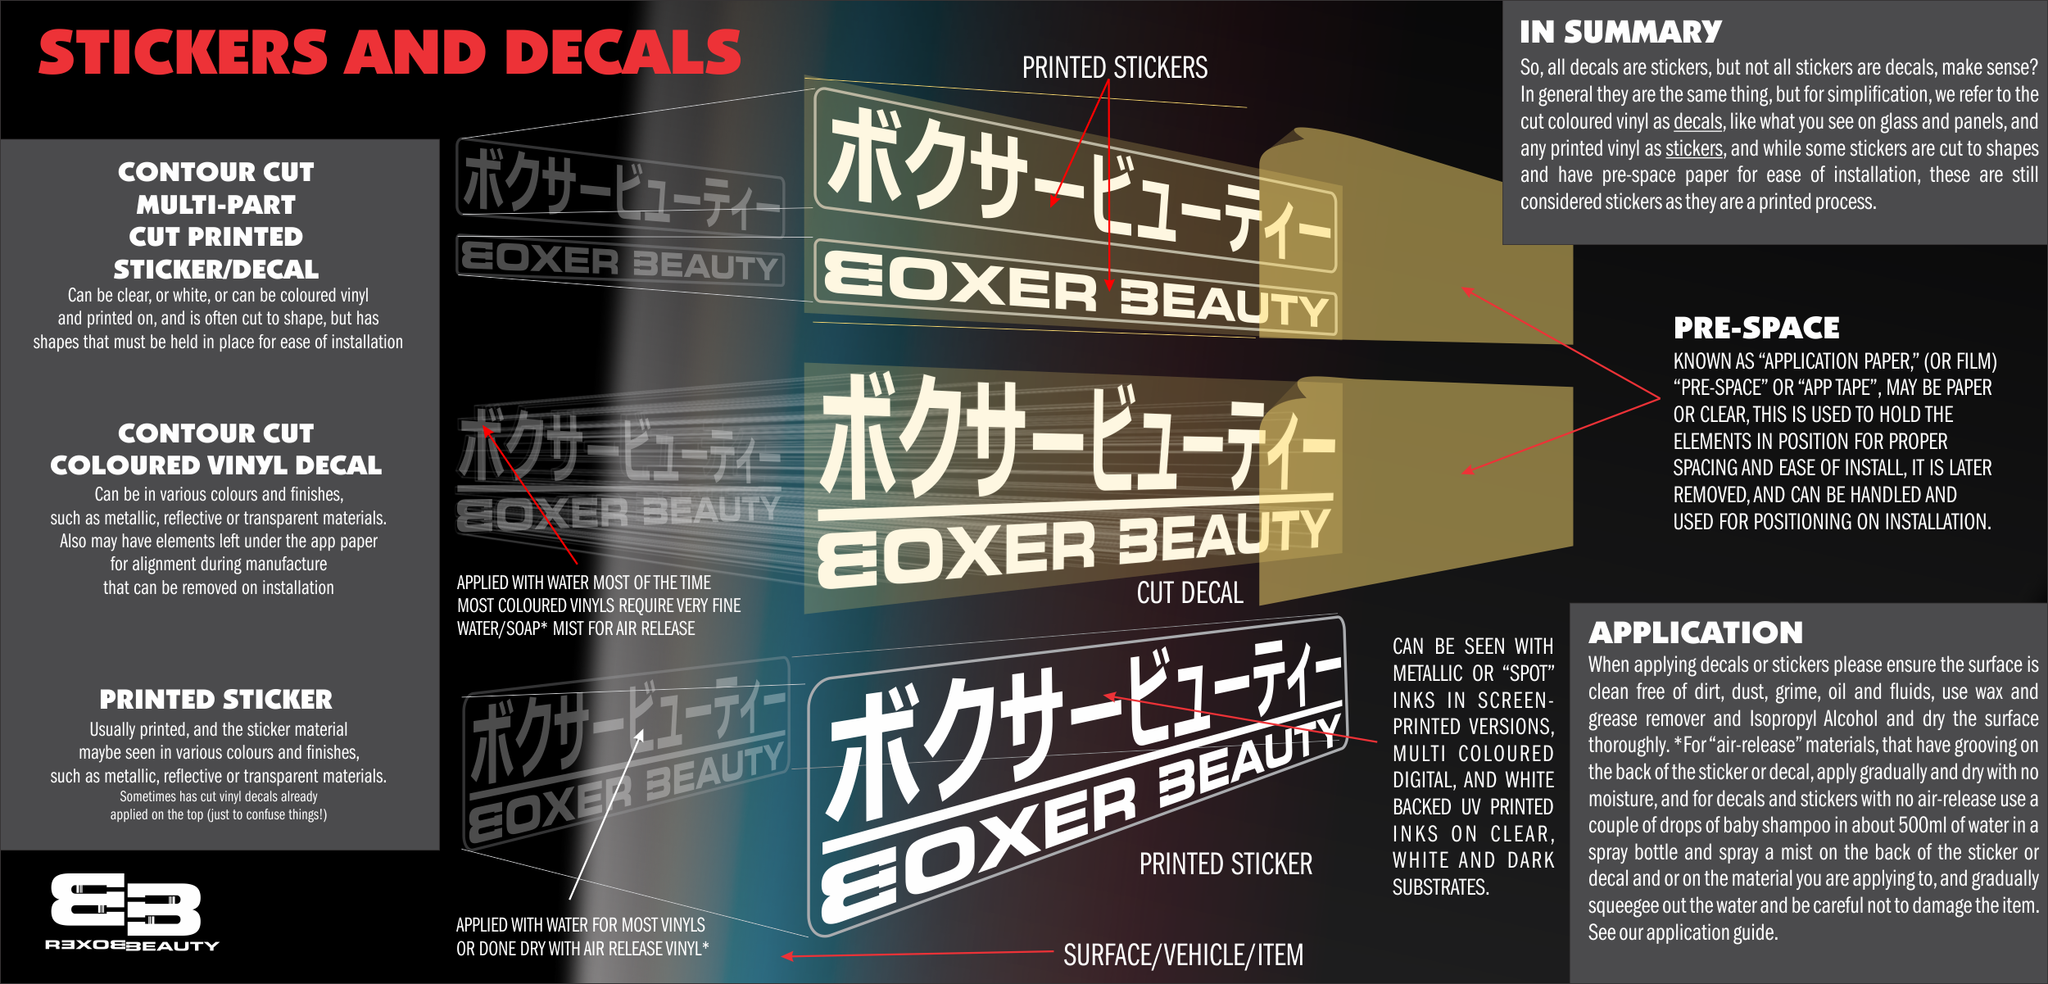 Boxer Beauty Sticker and Decal Guide